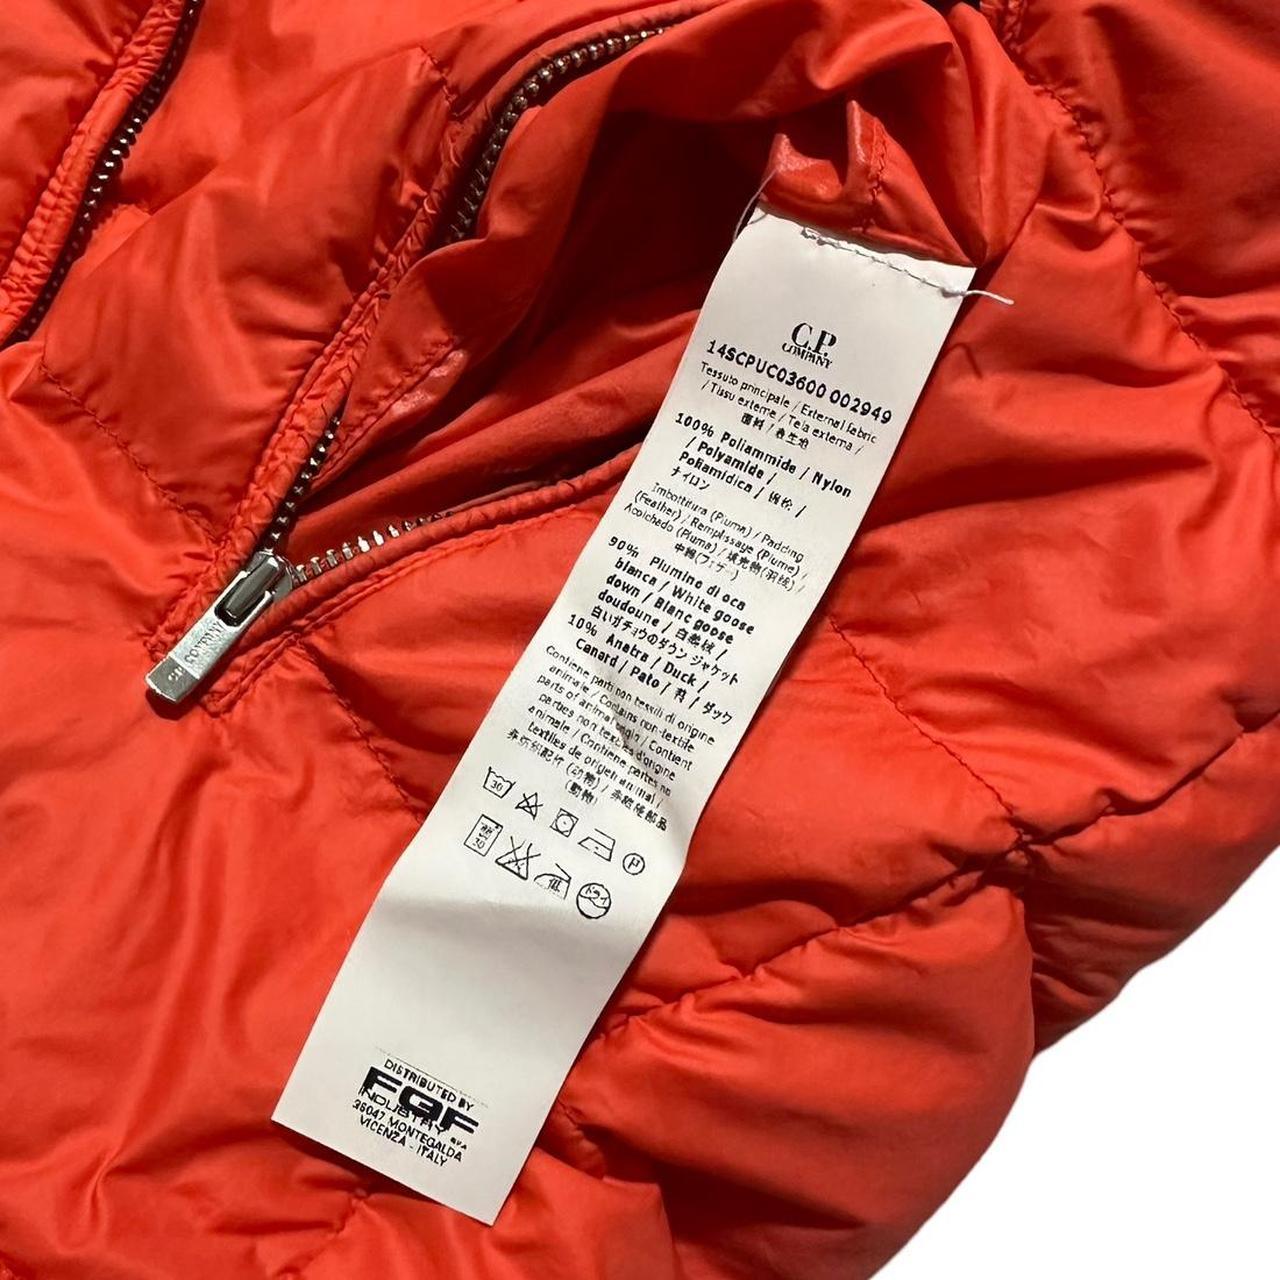 CP Company Big Lens Down Jacket - Known Source